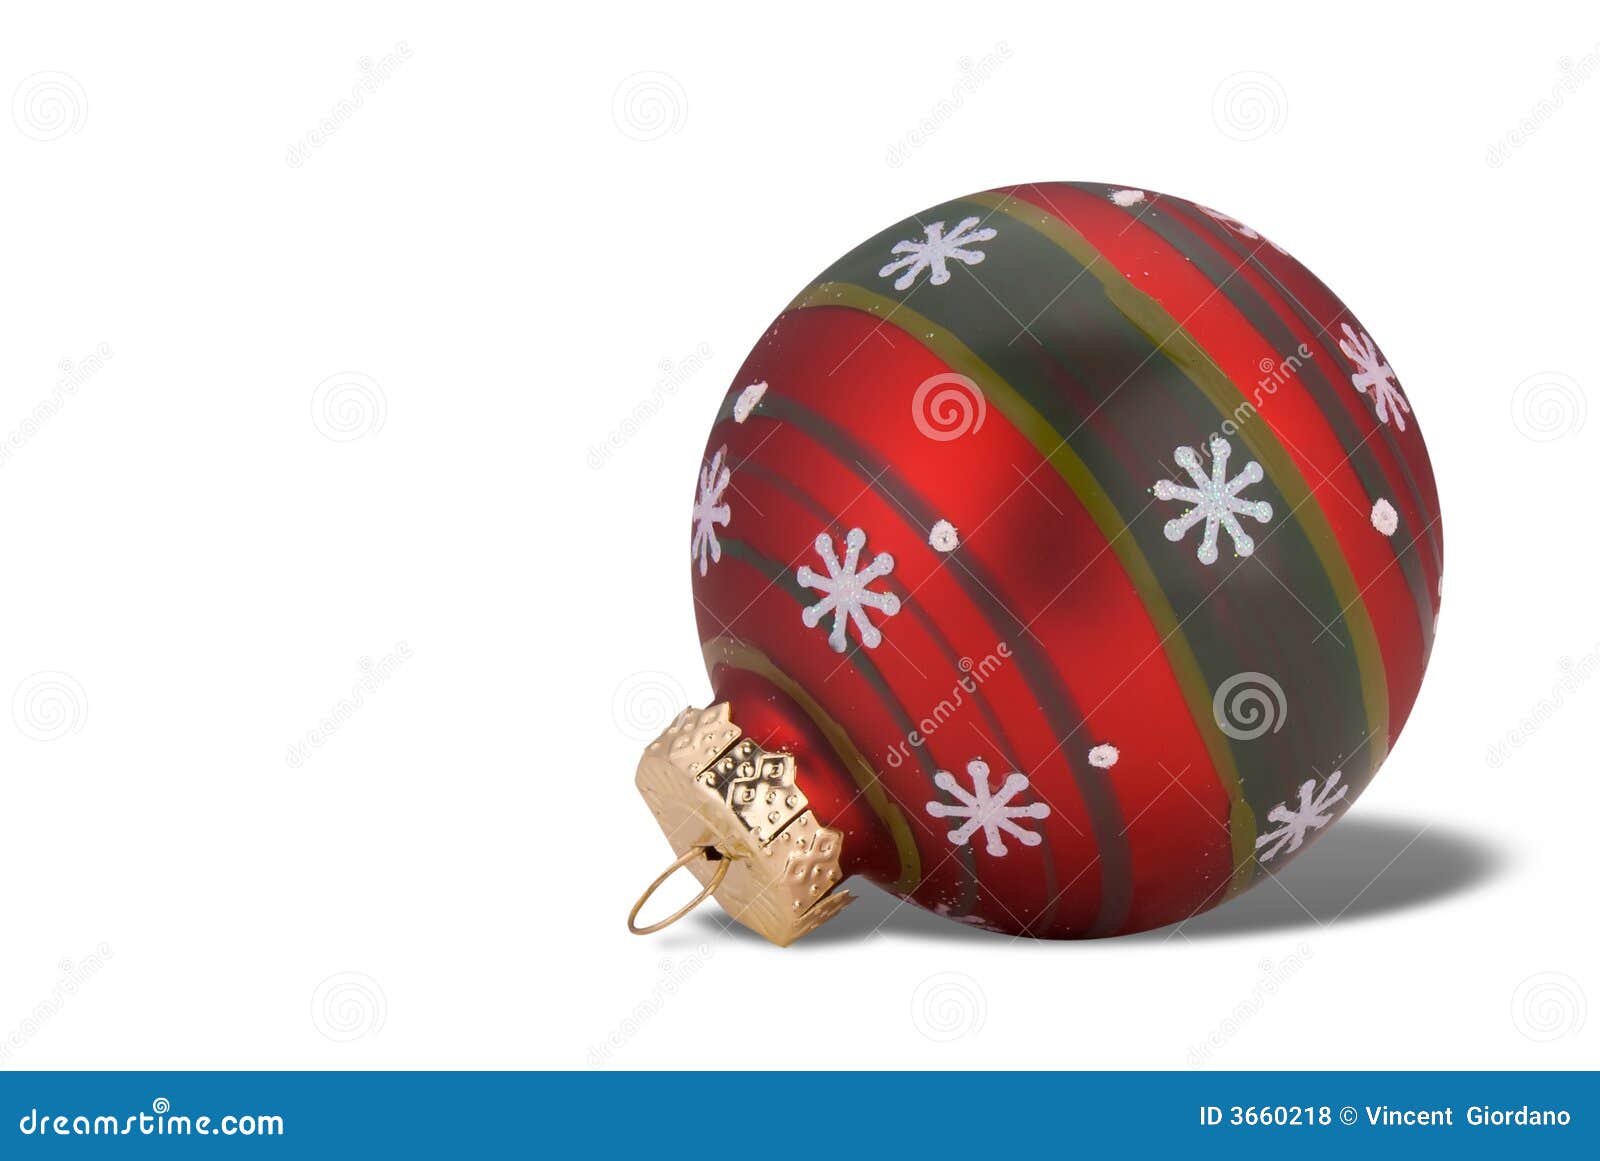 Red and Green Christmas Ball Stock Photo - Image of flake, sparking ...